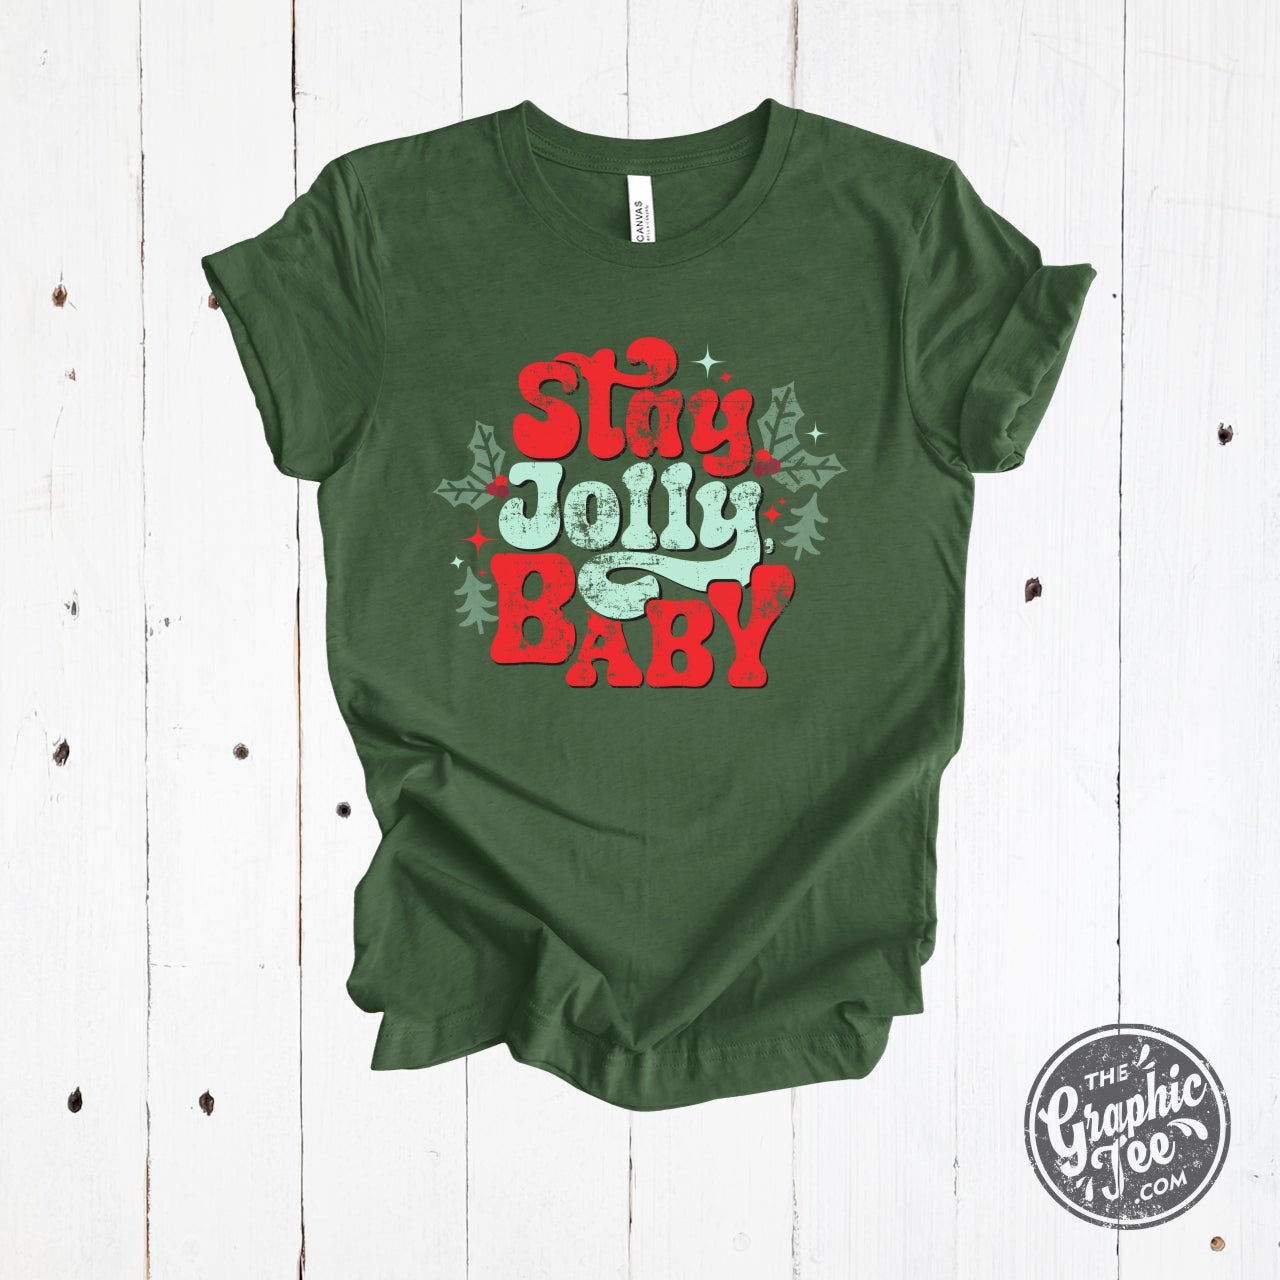 Stay Jolly Baby Heather Forest Short Sleeve Unisex Tee - The Graphic Tee